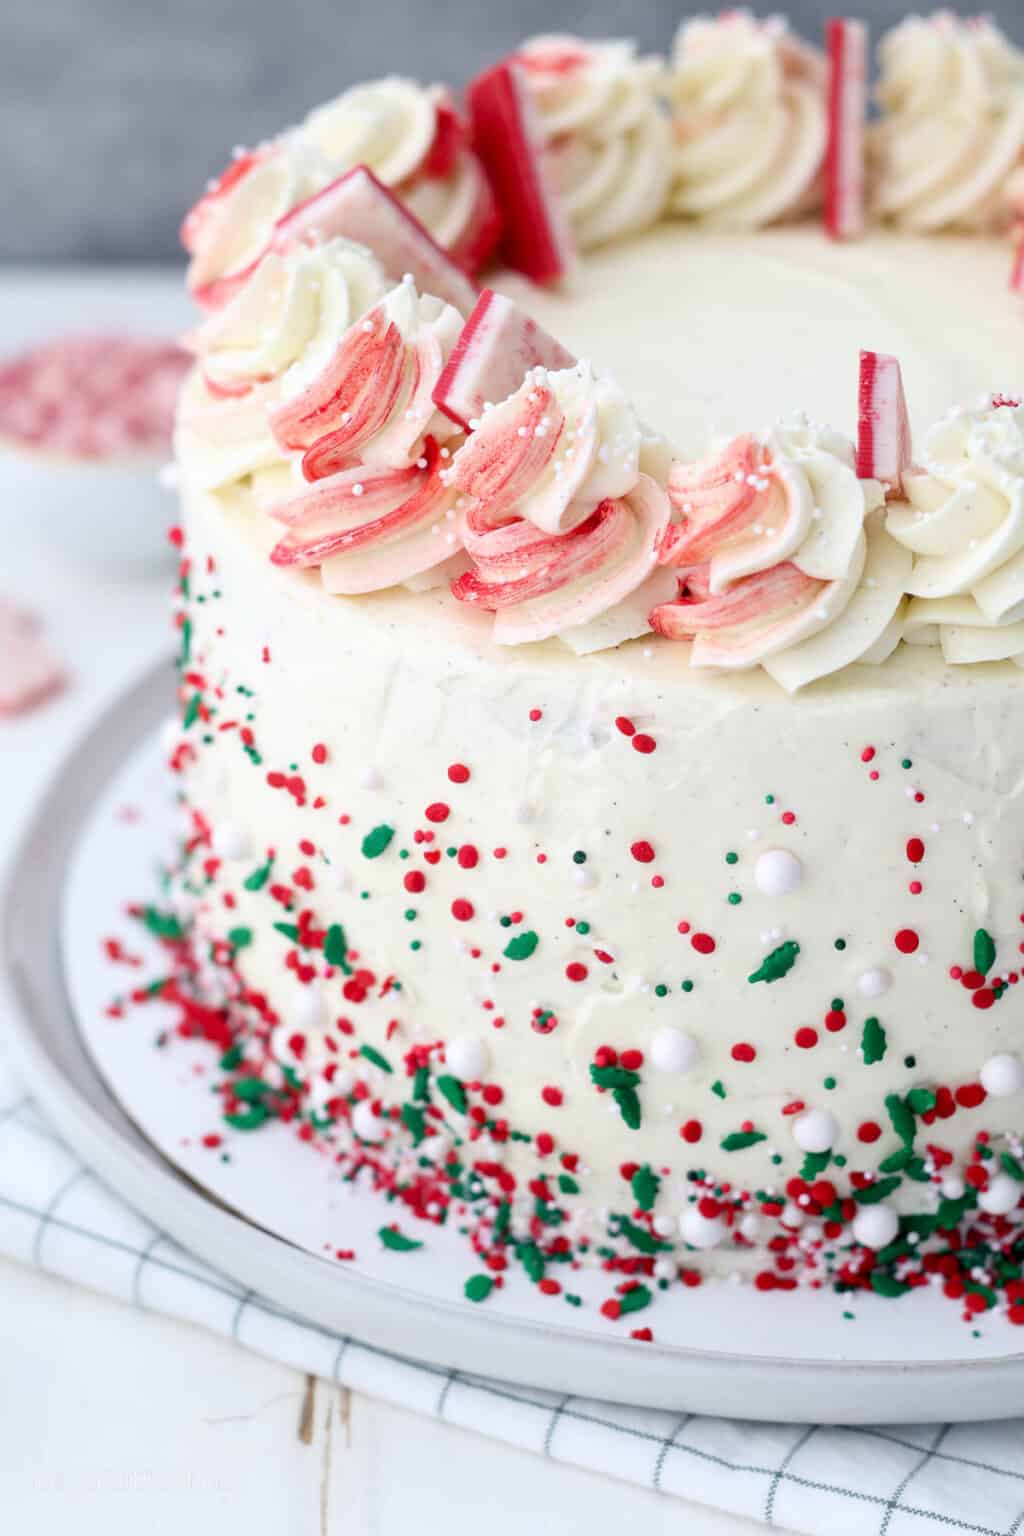 Chocolate Peppermint Cake - Beyond Frosting